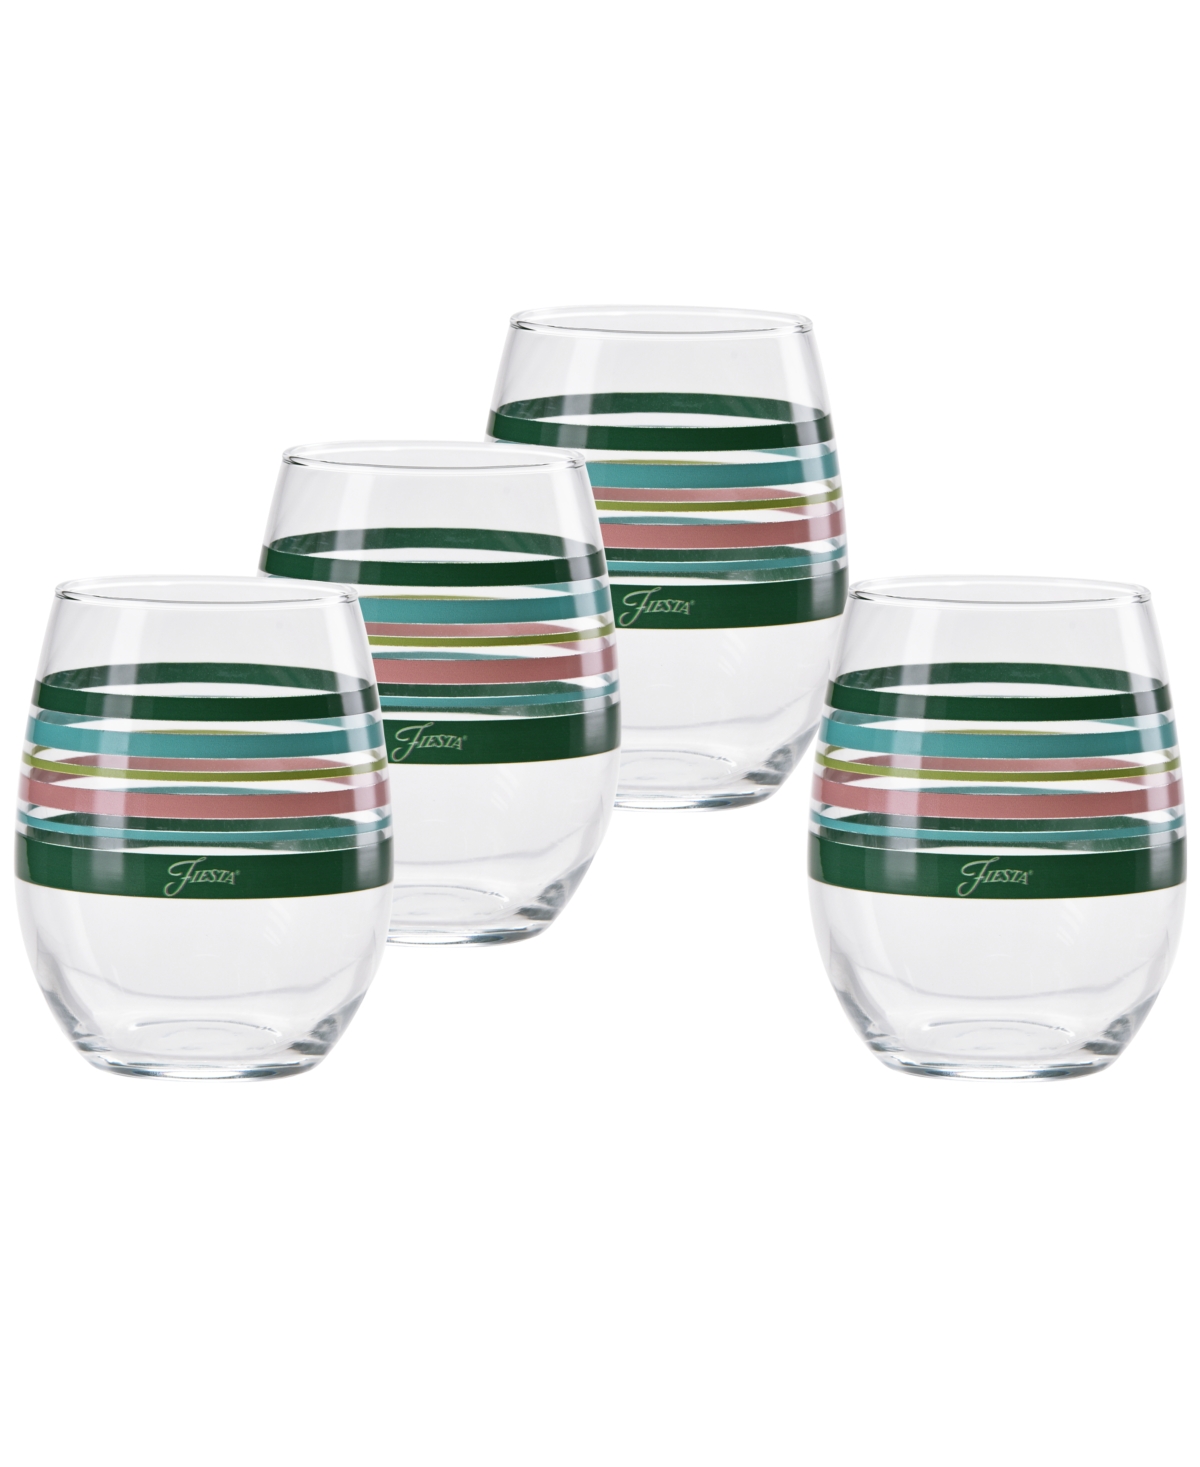 Fiesta Tropical Stripes Stemless Wine Glasses, Set Of 4 In Jade,turquoise,lemongrass And Peony